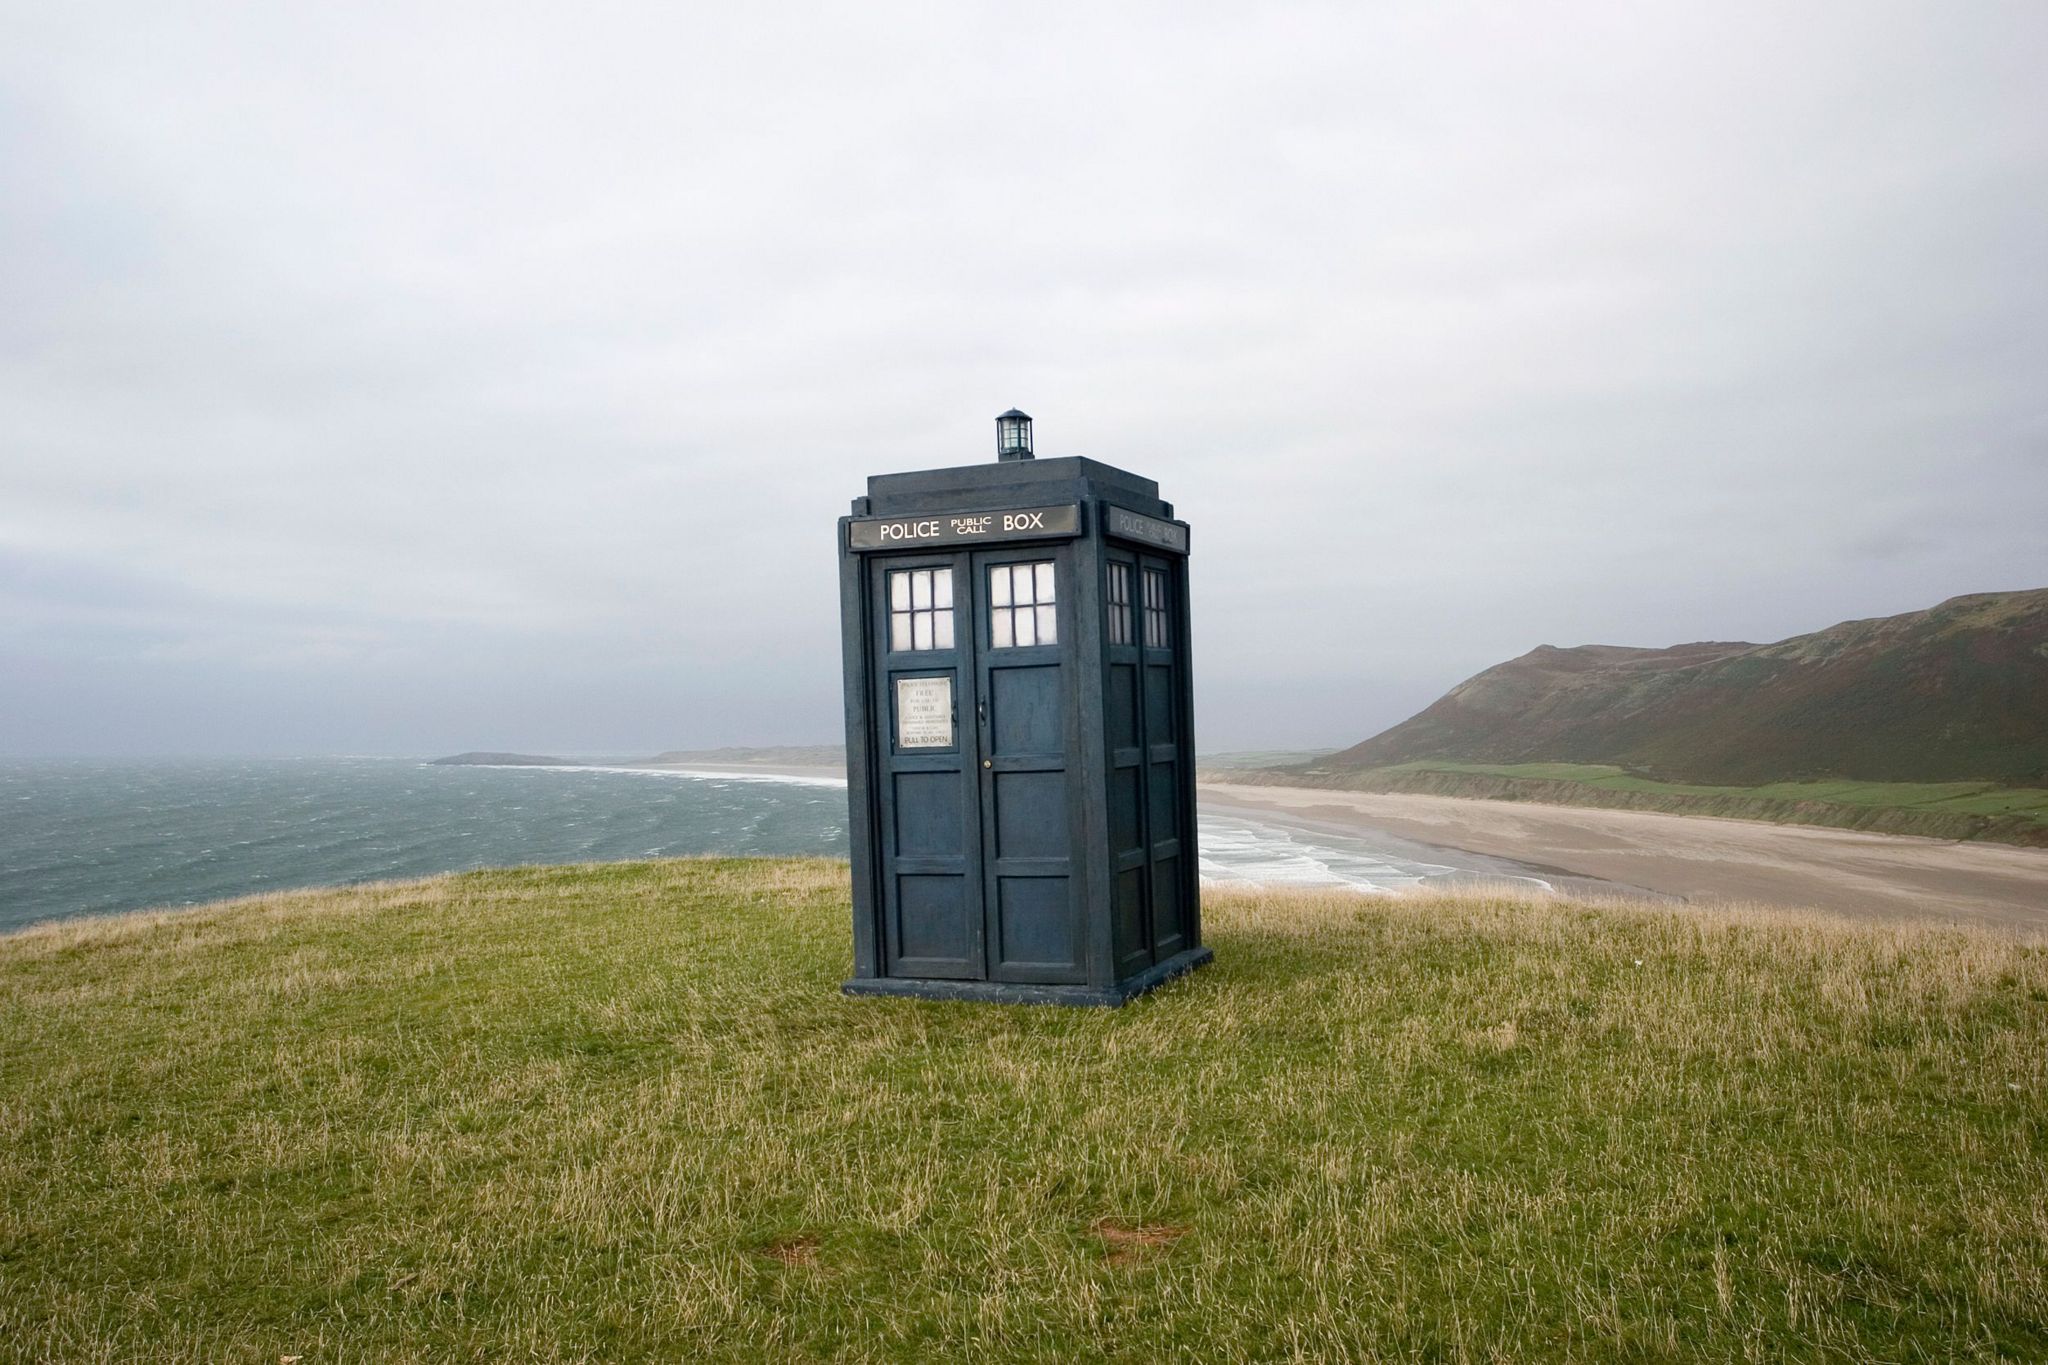 The TARDIS on a grassy hill overlooking the sea